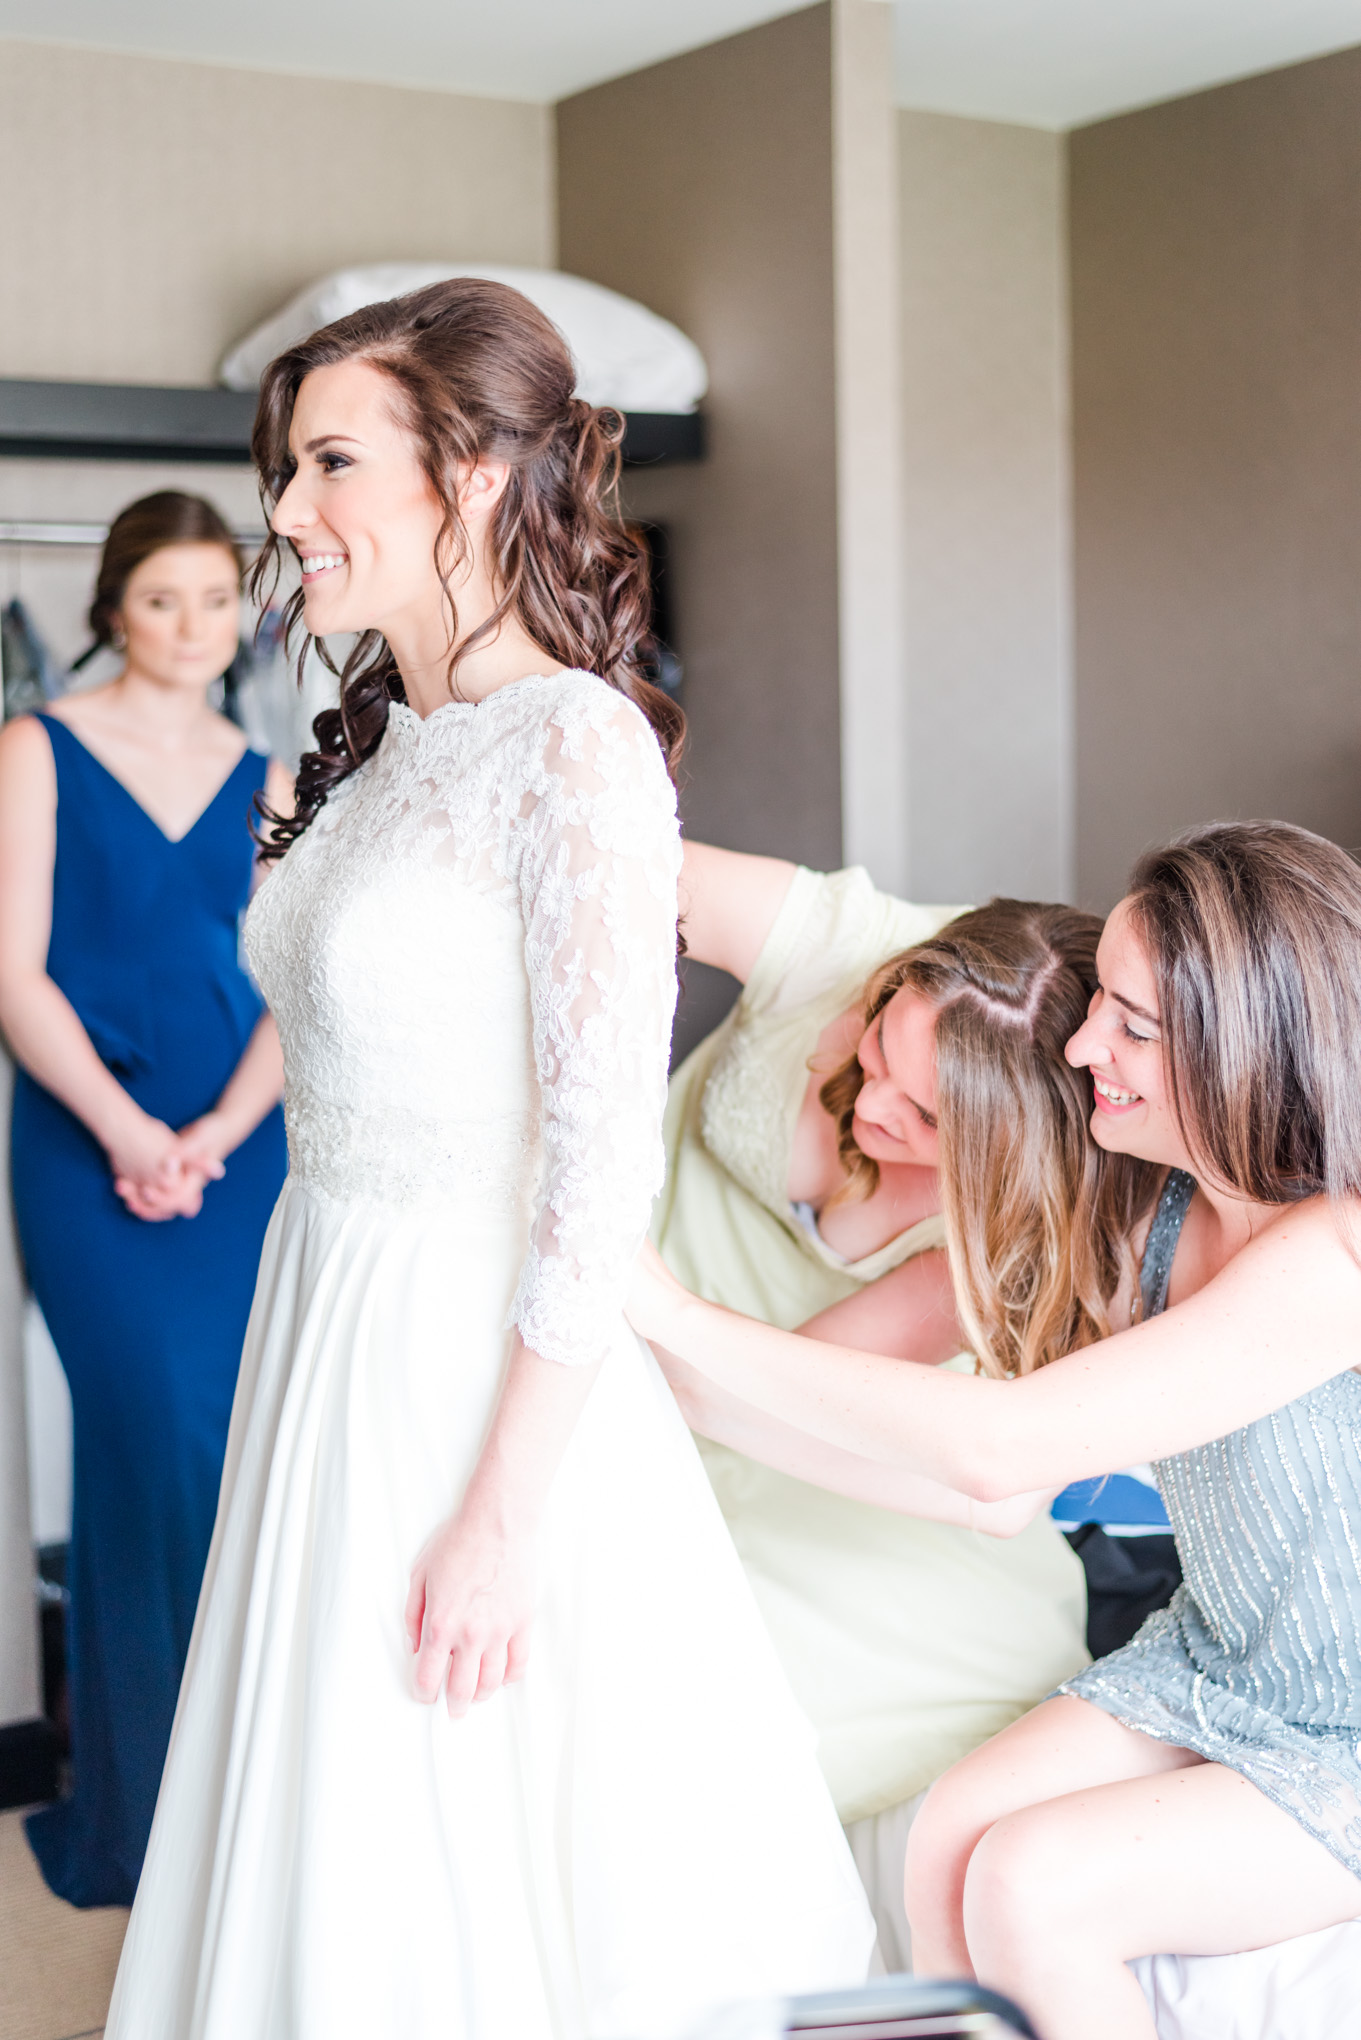 client experience, wedding photography, wedding photography investment, wedding photographer, Virginia wedding photographer, Maryland wedding photographer, behind the scenes, bridesmaids, wedding day, getting ready portraits